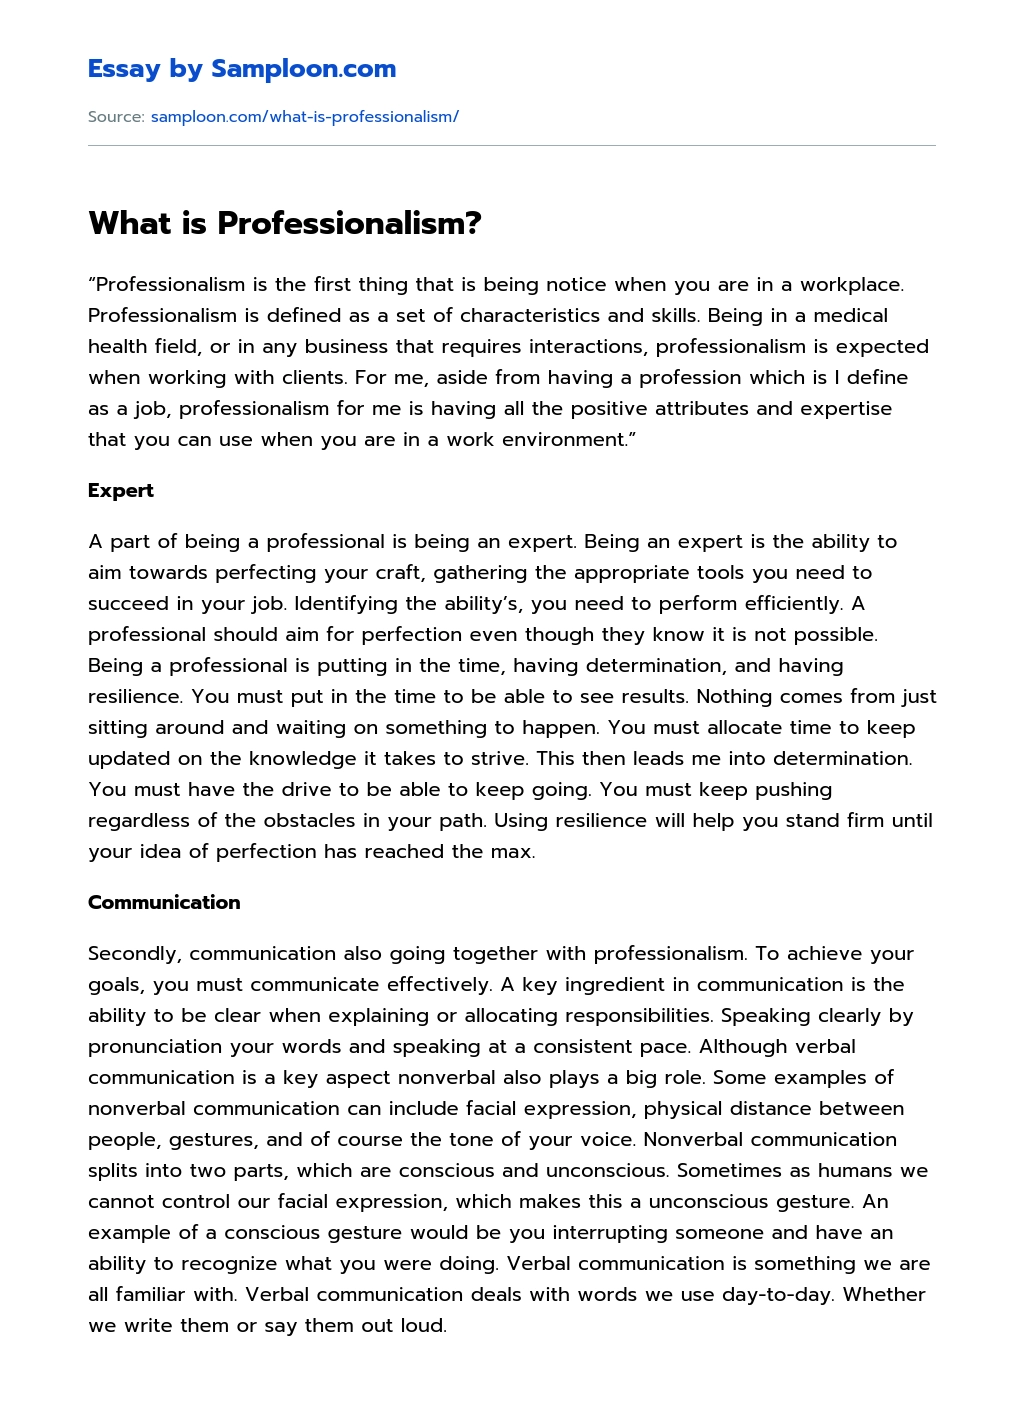 What is Professionalism? essay